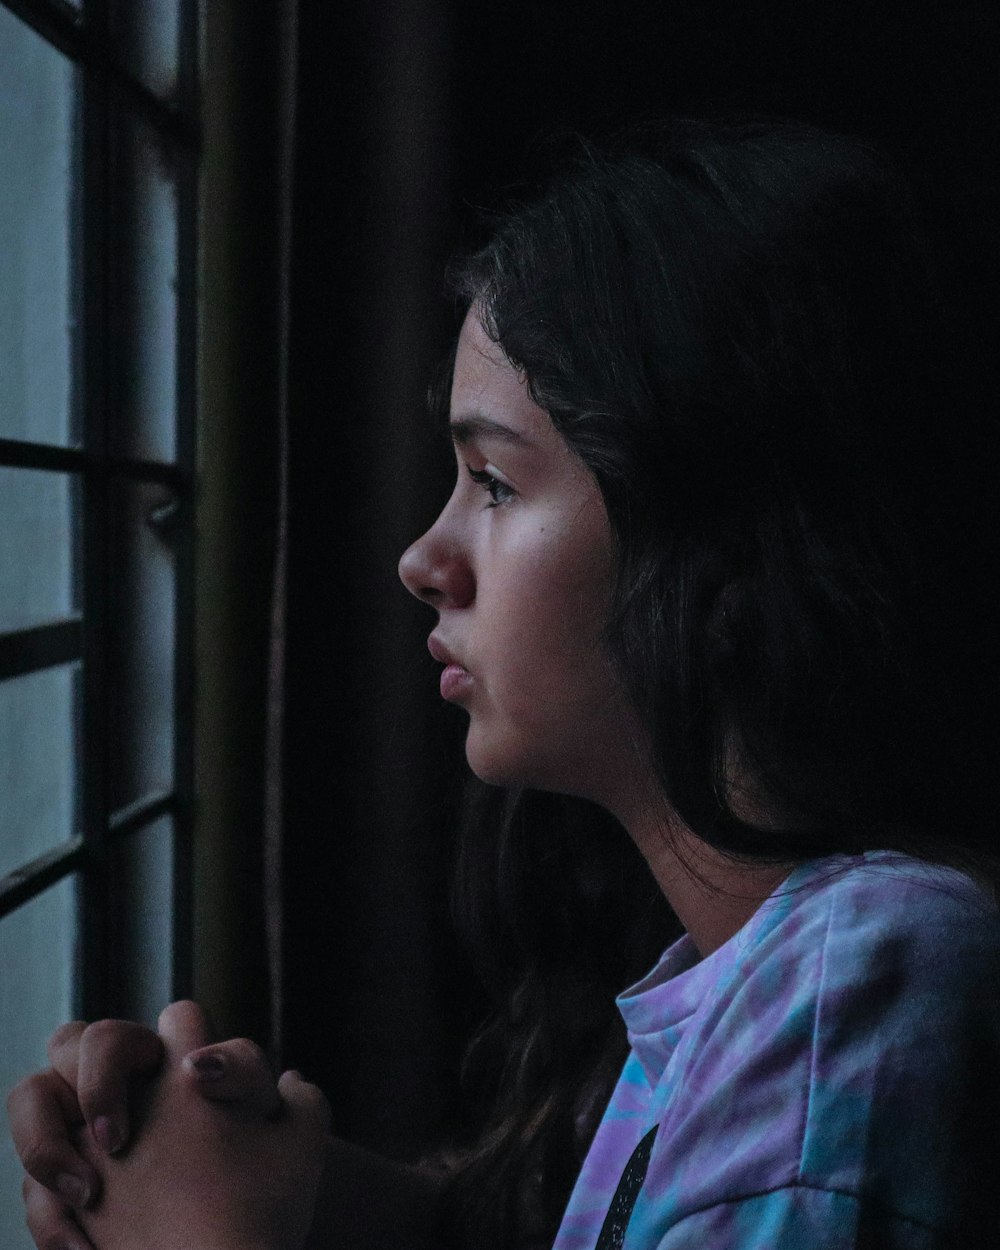 a young girl looking out a window at night